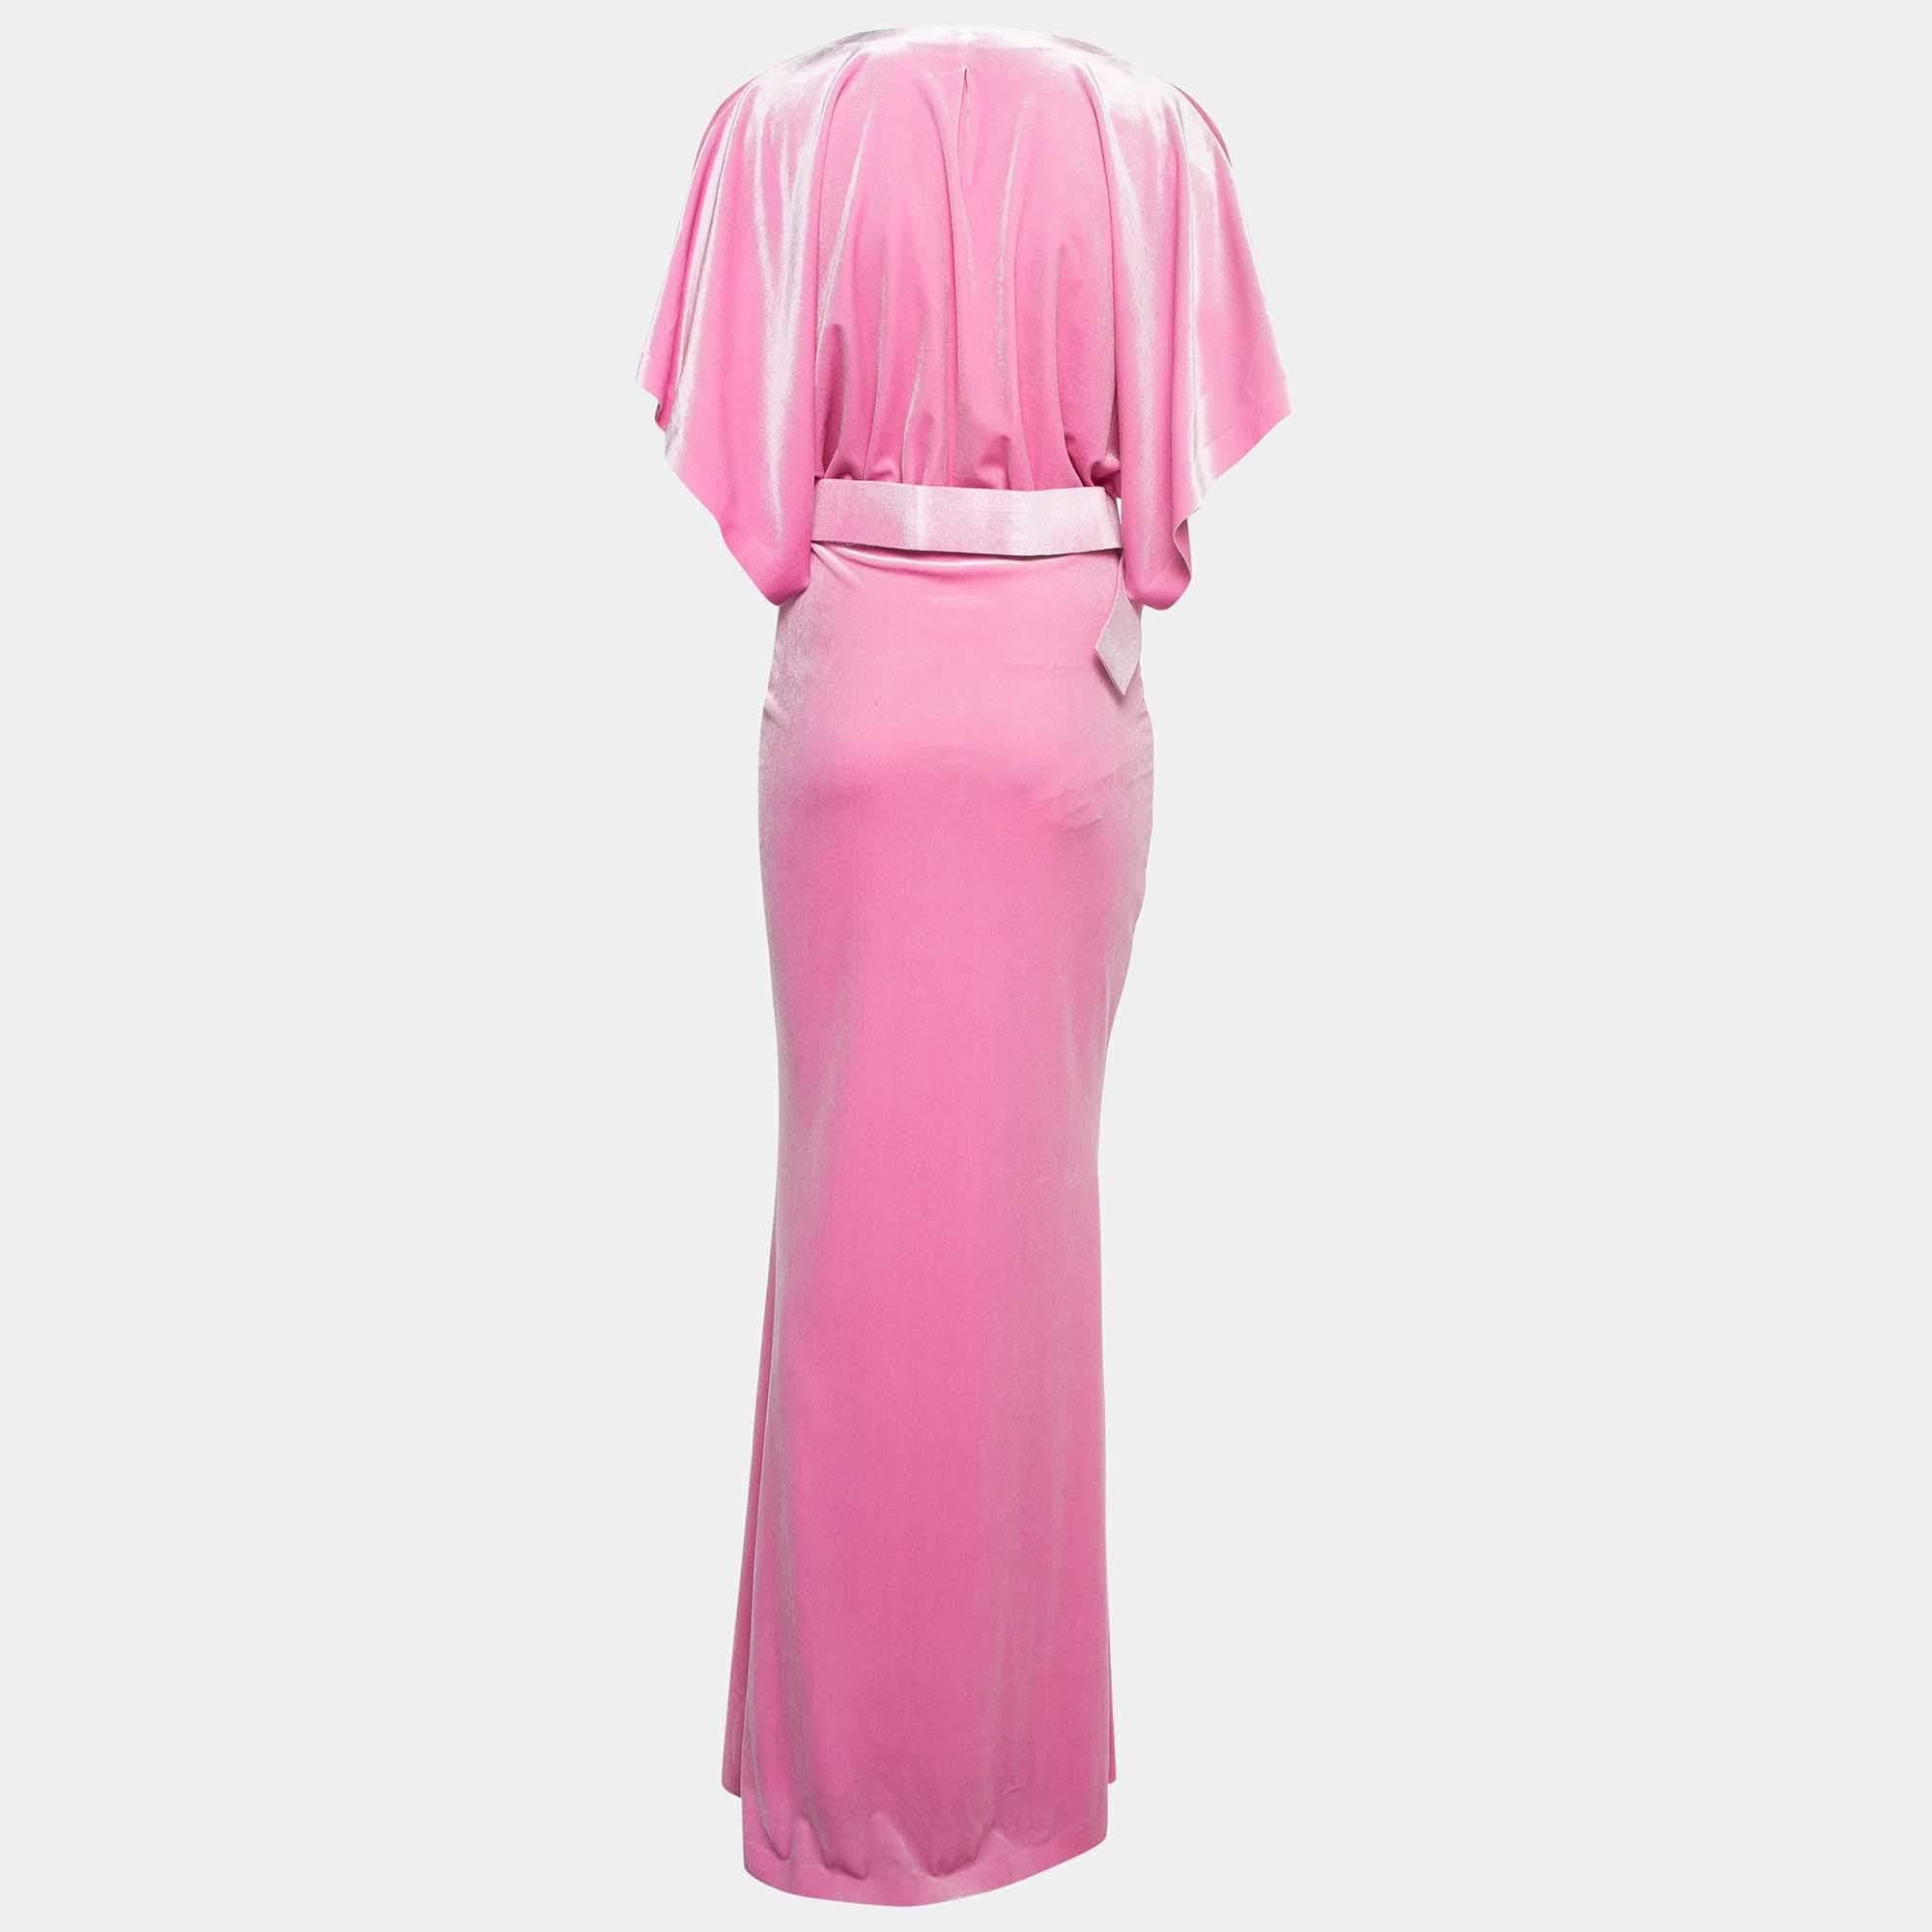 Masterful tailoring and timeless appeal characterize this belted gown from Norma Kamali. Presented in pink, it is nothing but pure charm and is a must-have.

Includes: Belt